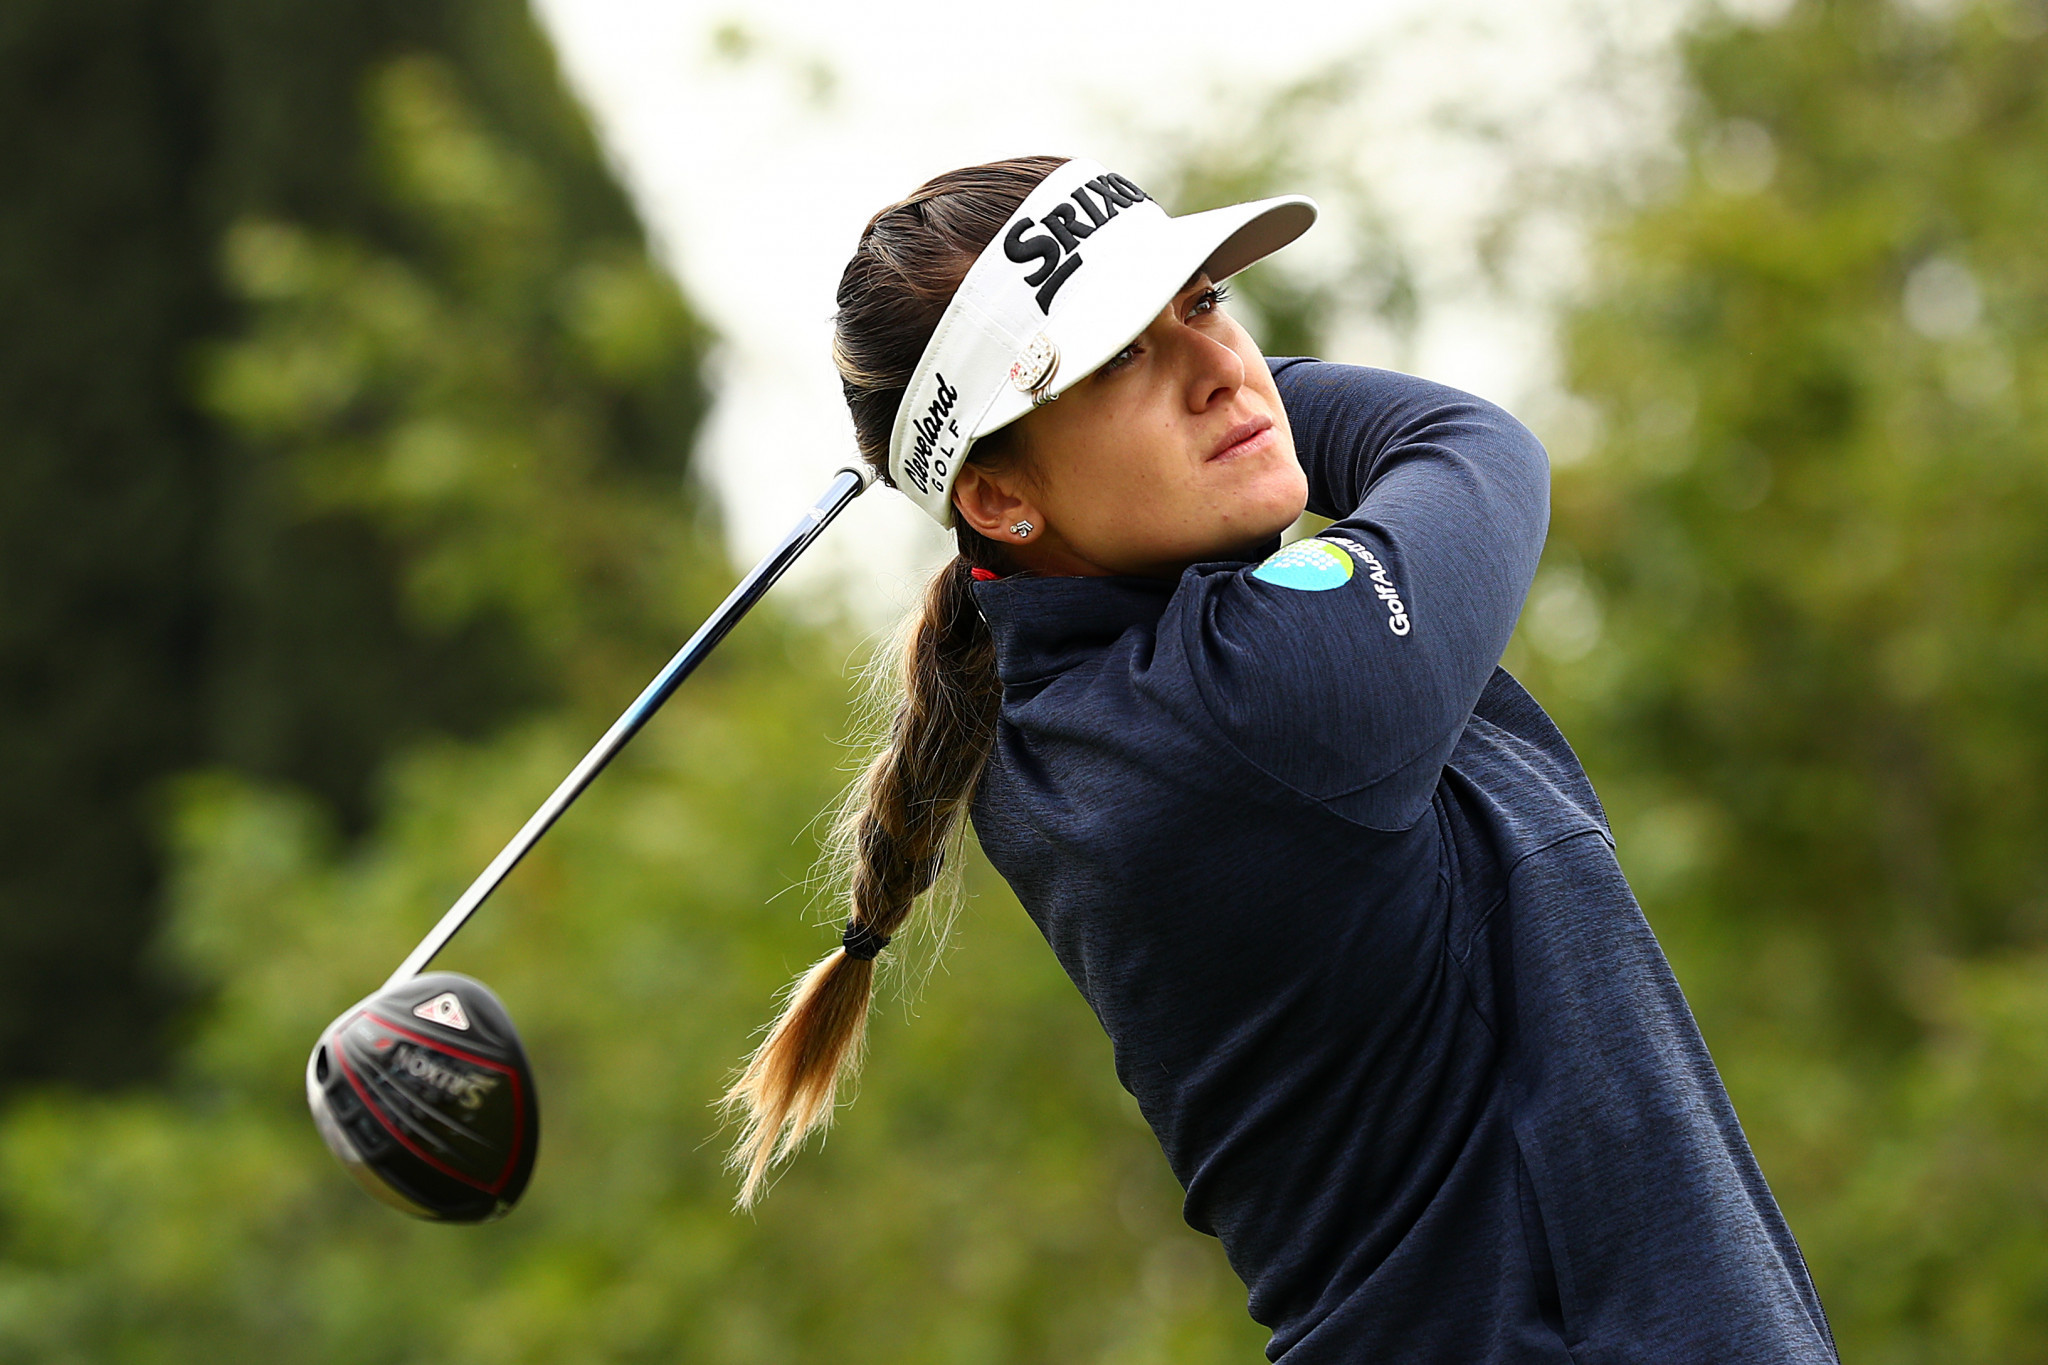 Australia’s Hannah Green holds a one-shot lead after the opening round of the Women's PGA Championship at Hazeltine National Golf Club in Minnesota ©Getty Images